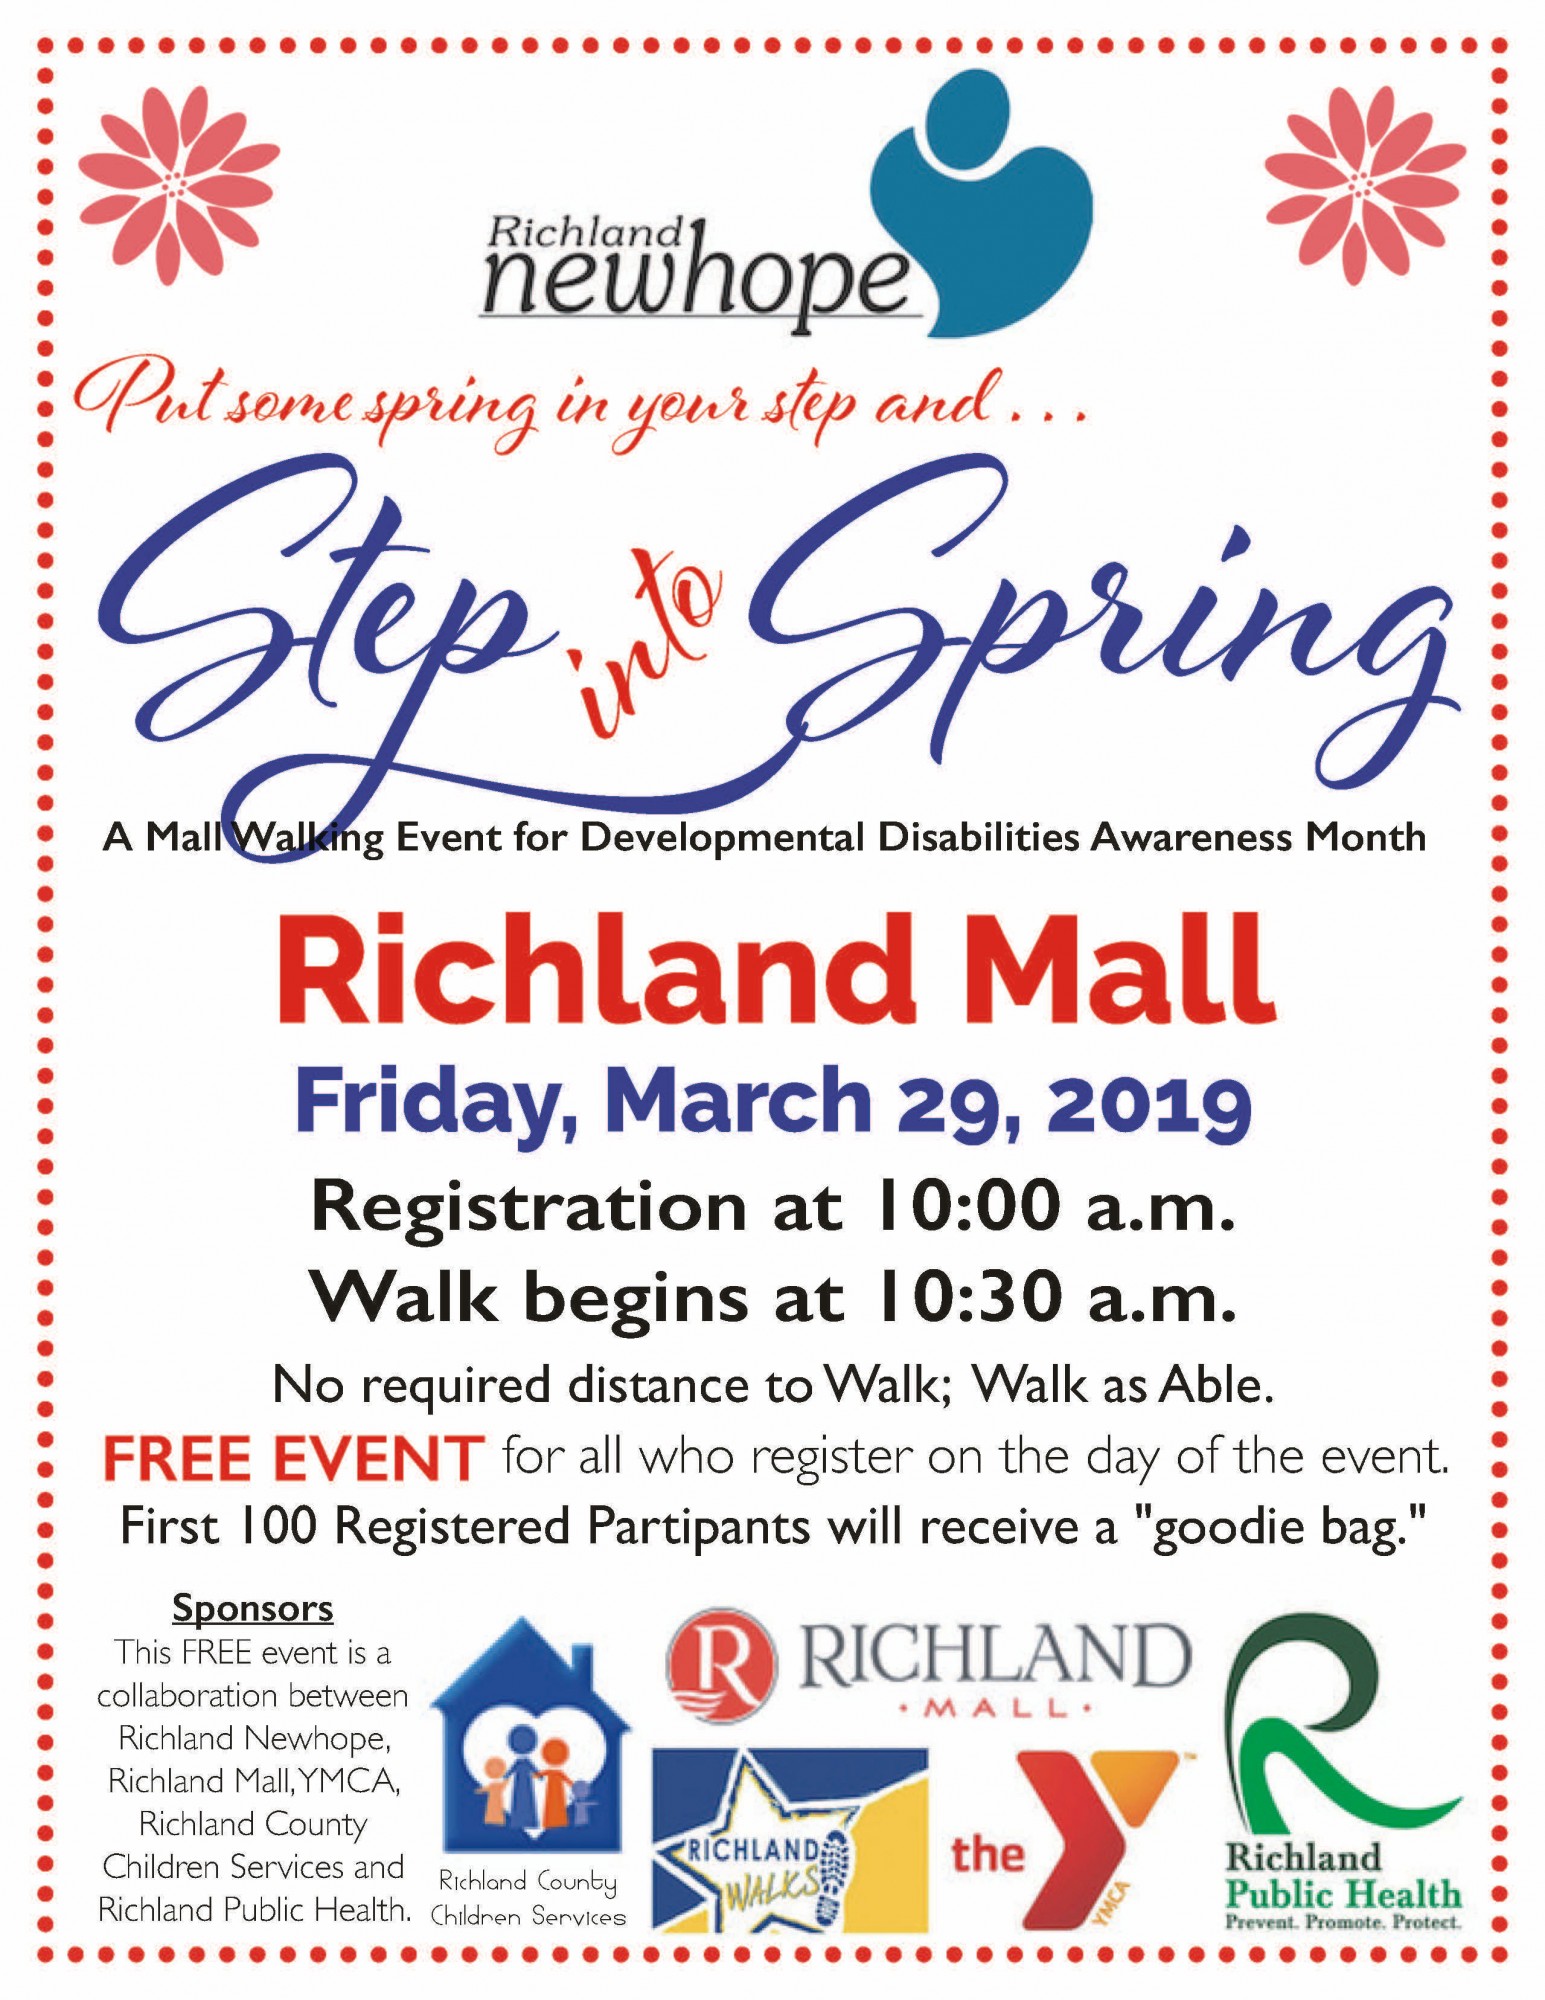 Mall walking event planned for Developmental Disabilities Awareness Month